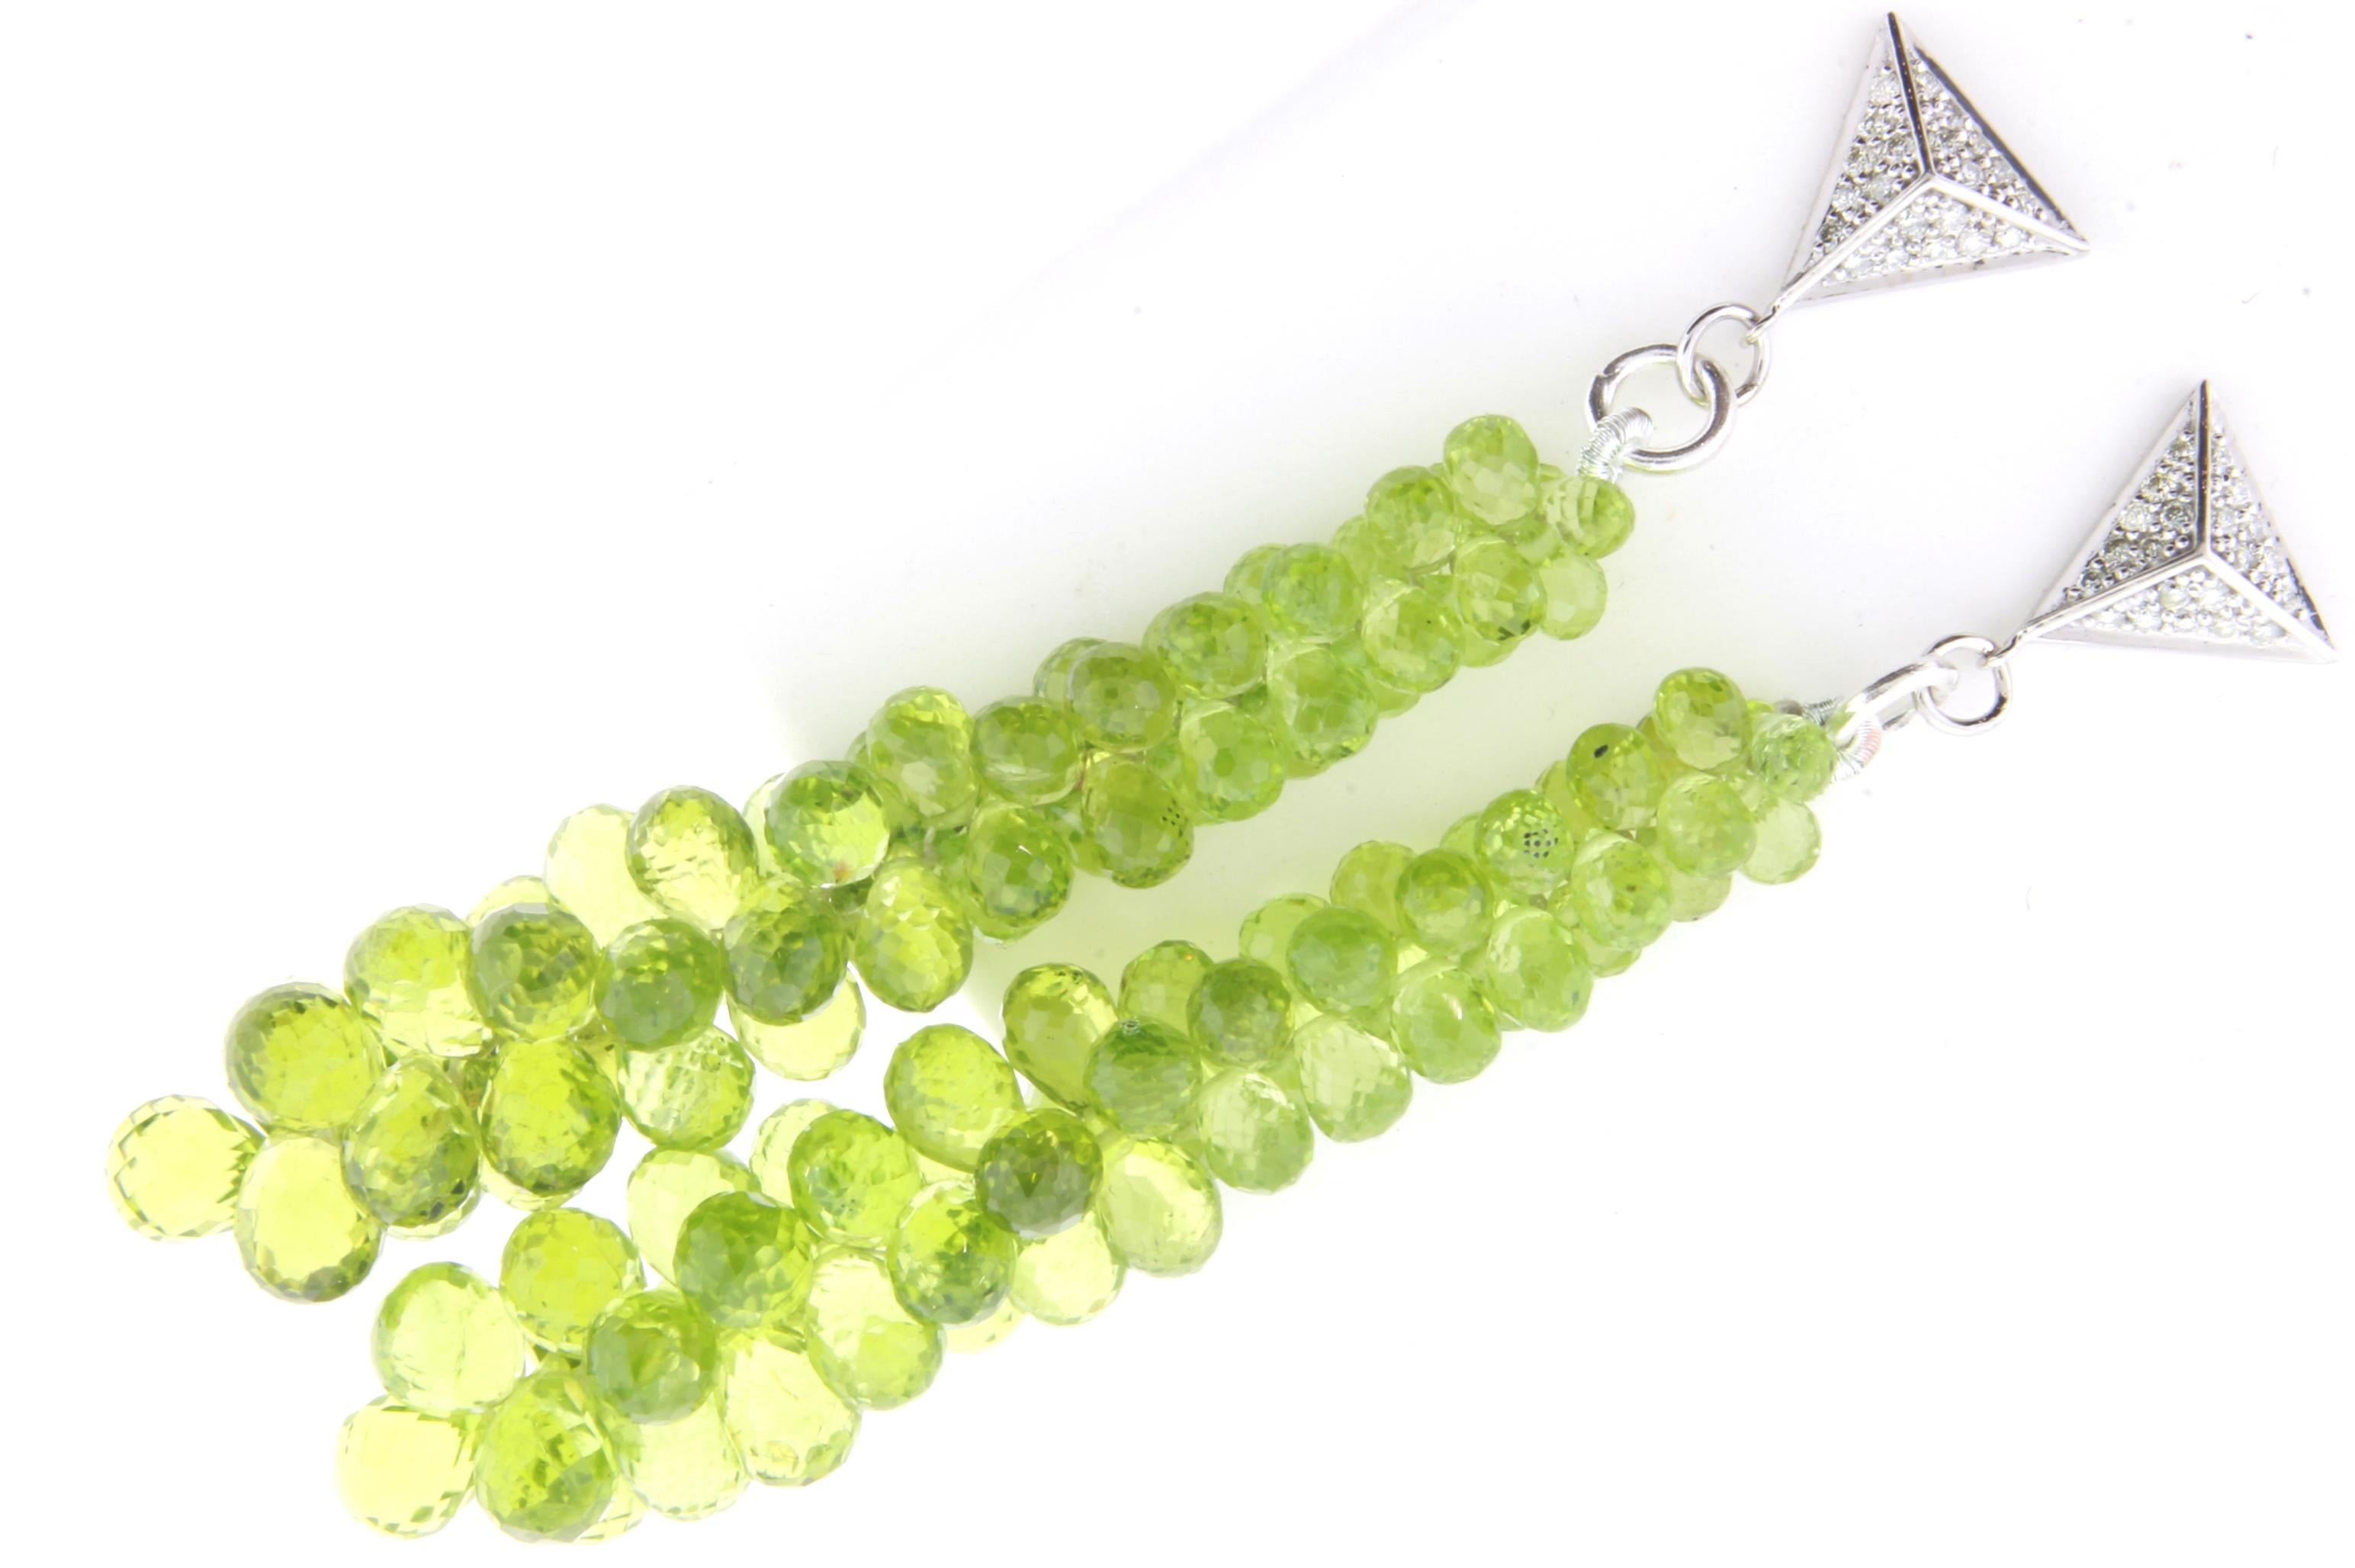 From our briolette earring collection!

Material: 14k White Gold 
Stone Details: 2 Briolette Shaped Peridots at 77.35 Carats Total
Diamond: 42 Brilliant Round Diamonds at 0.25 Carats - SI Quality / H-I Color
Earring Length: 3 inches

Fine